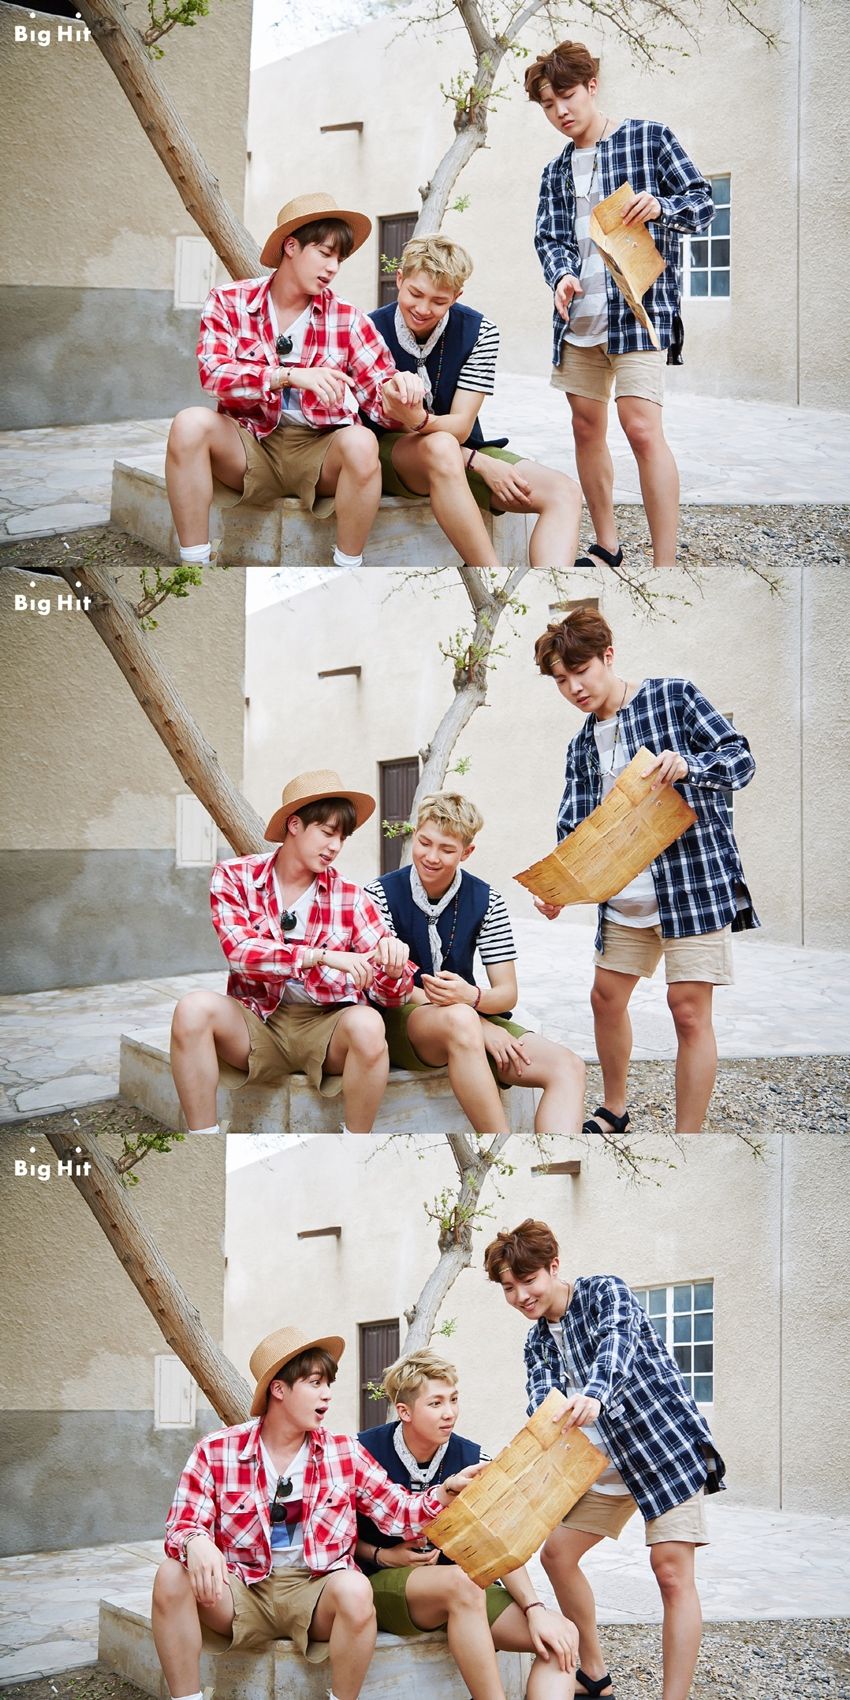 Interview Trans] [STARCAST] Let's Enjoy The Summer Holiday